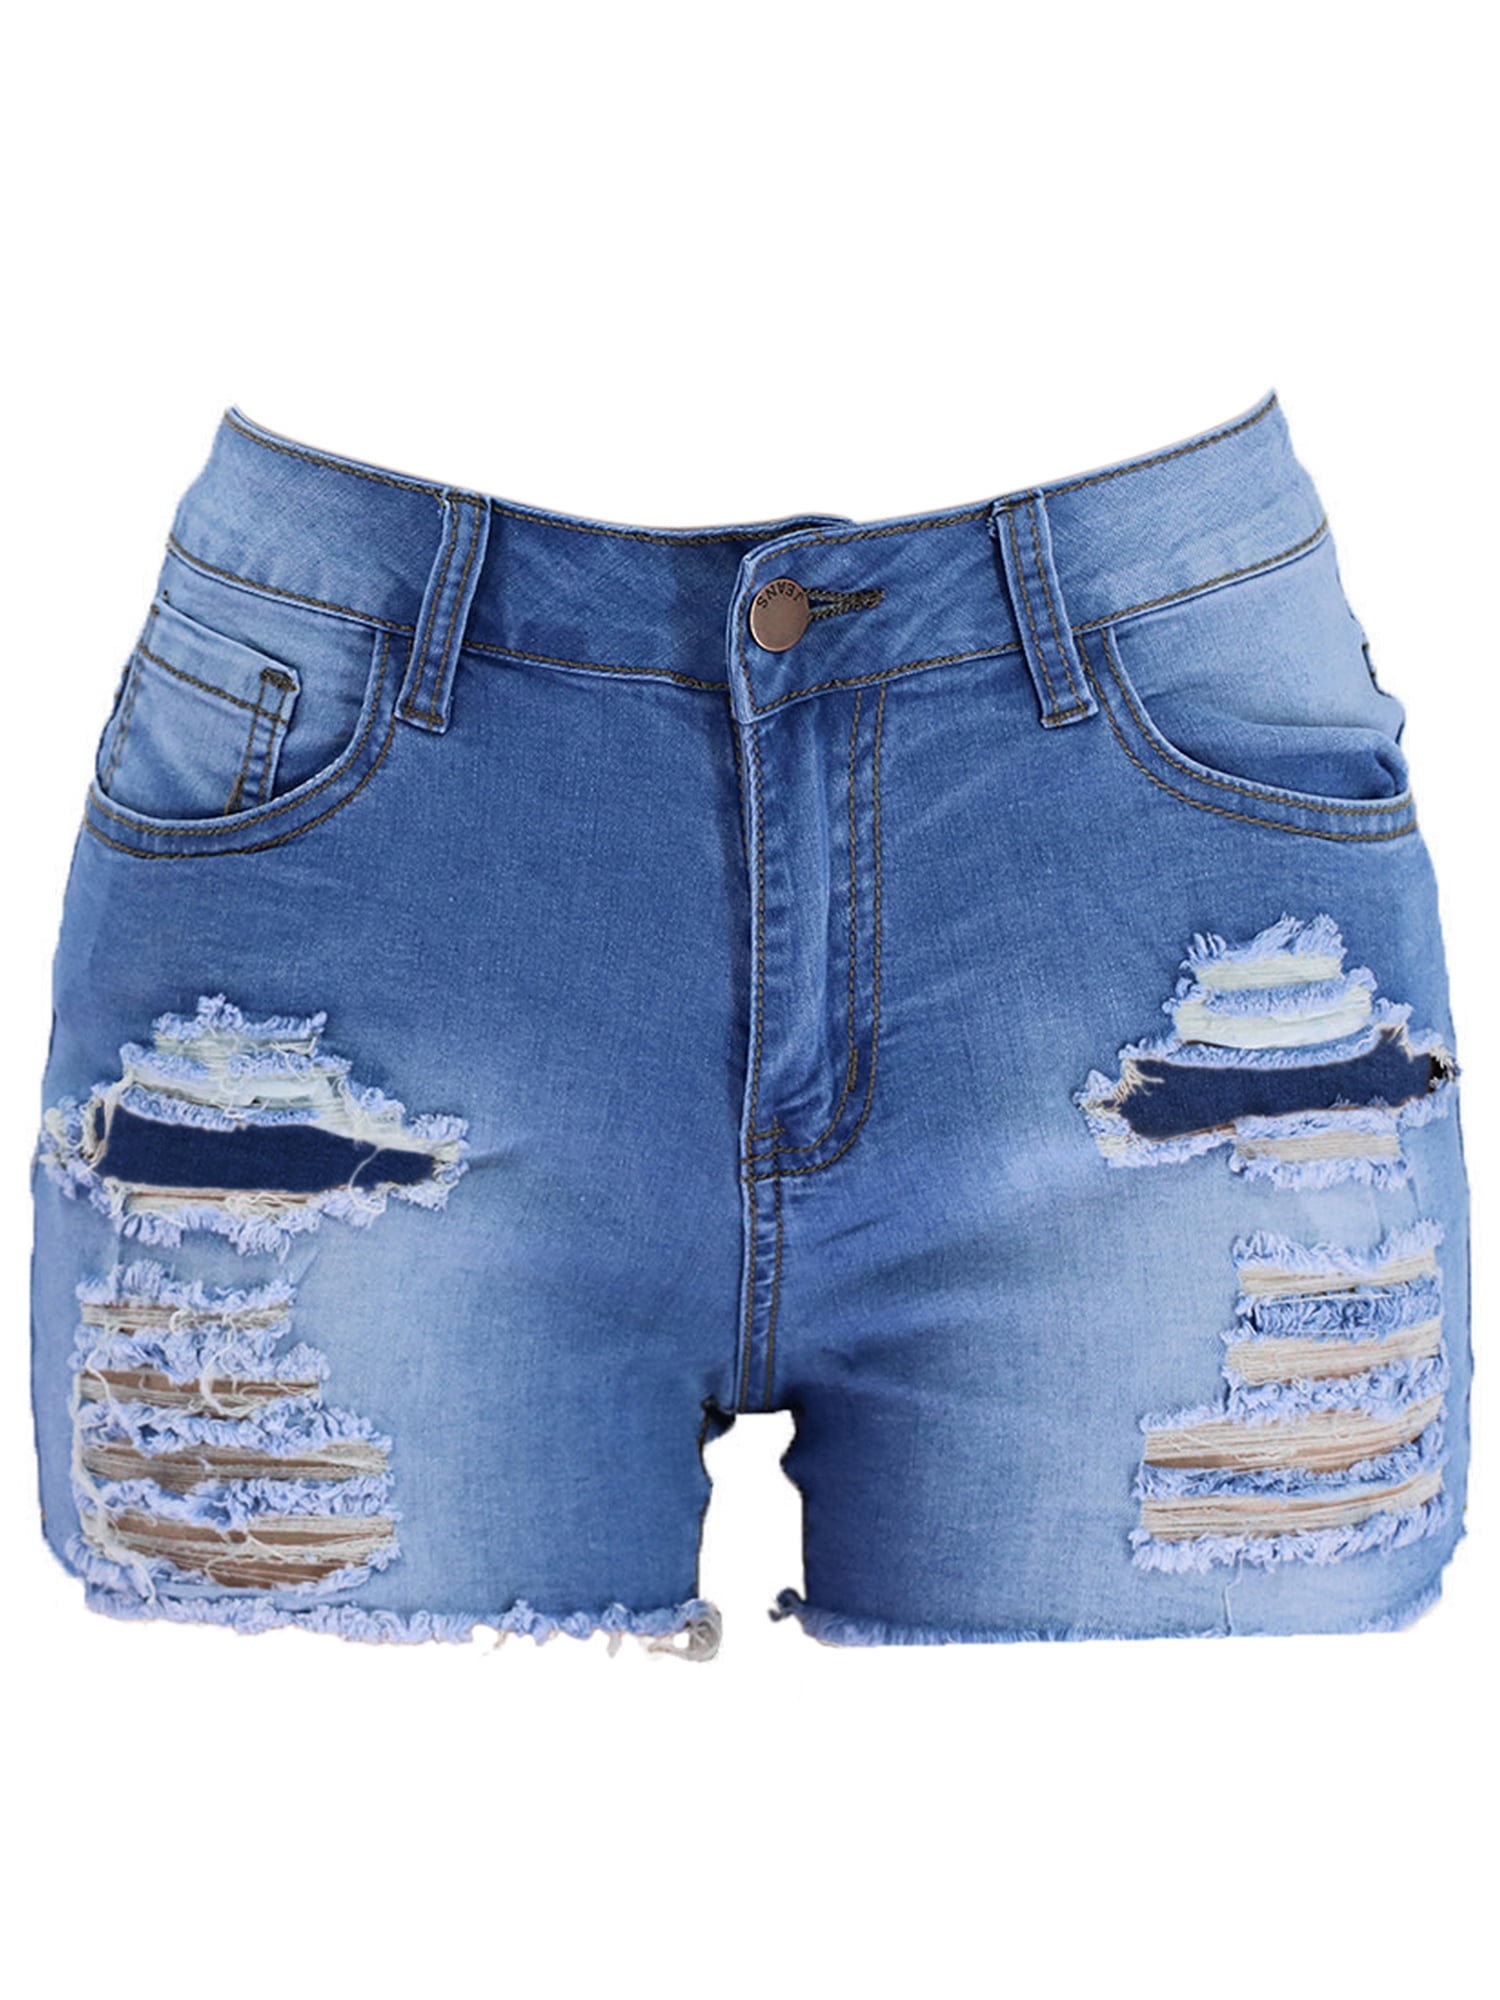 ripped jean shorts womens